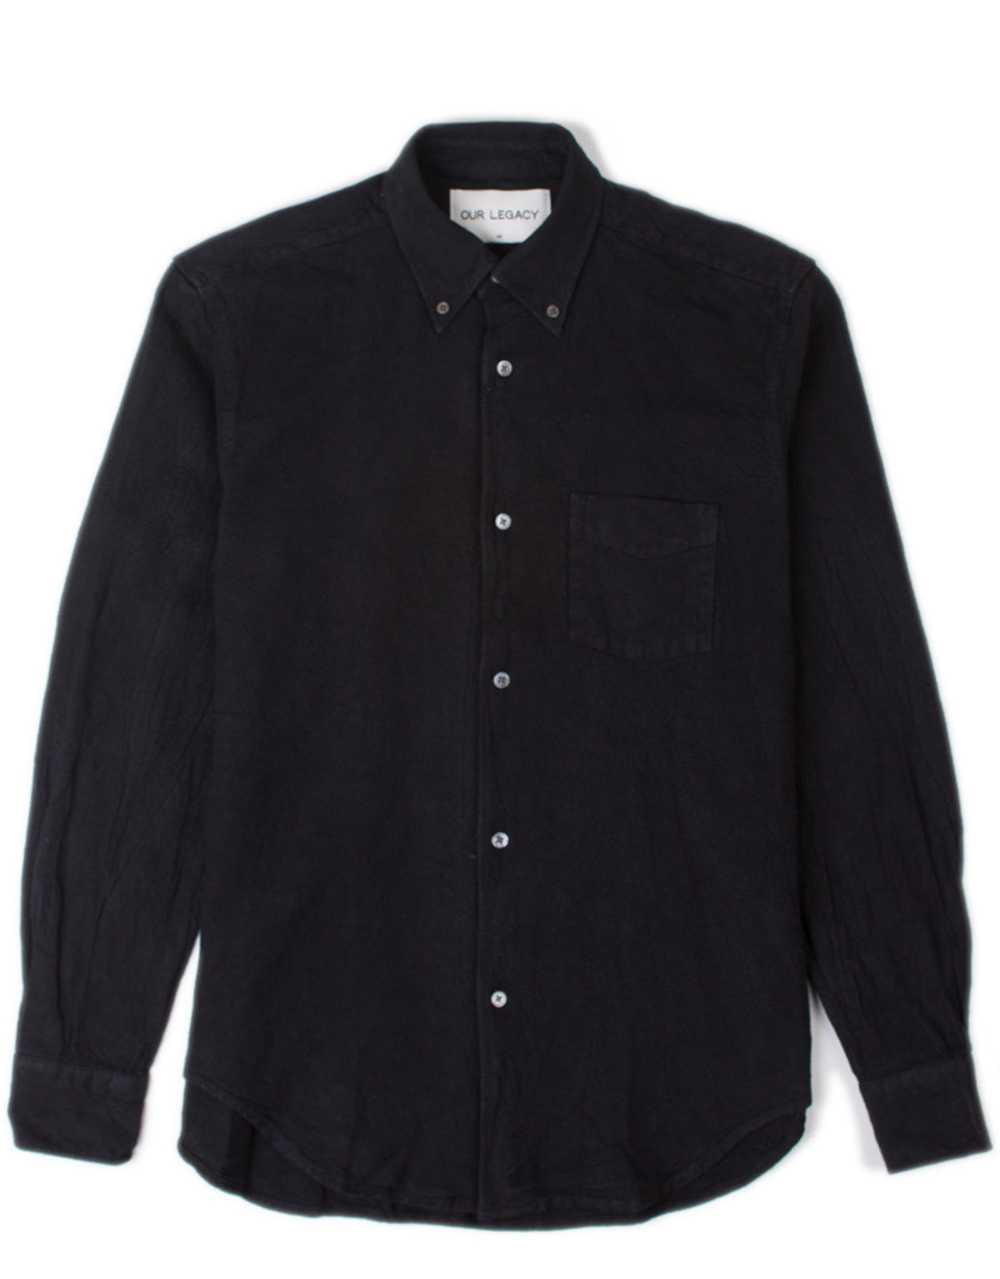 Our Legacy 1950'S SHIRT BLACK H.A. OXFORD - image 2